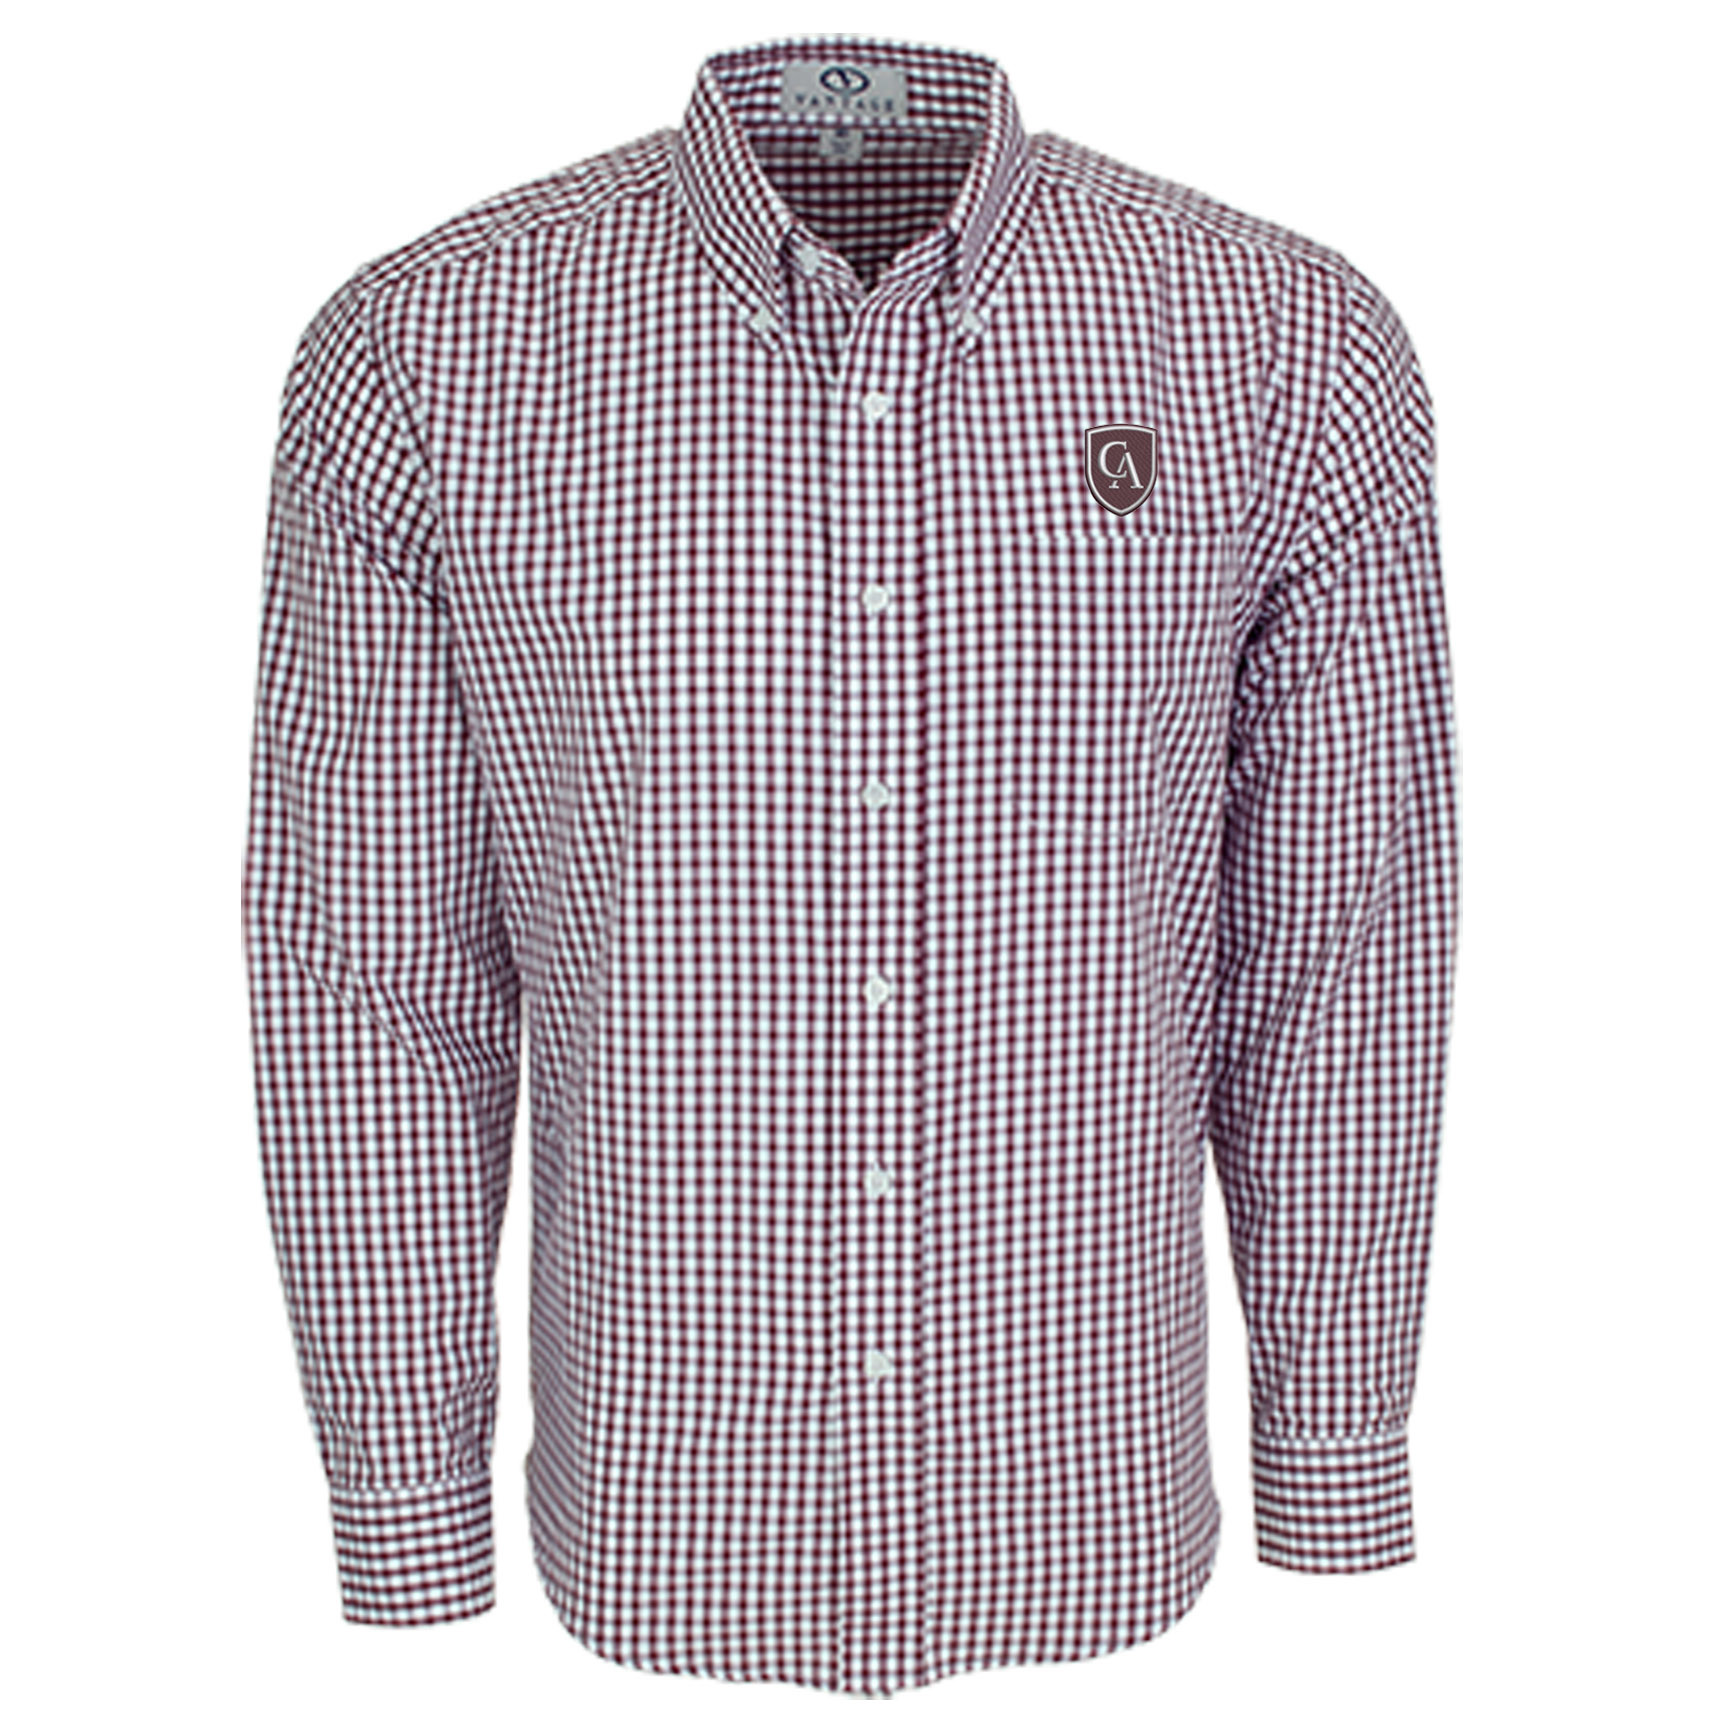 Vantage Vantage Men's Easy-Care Gingham Check Shirt with shield #1107